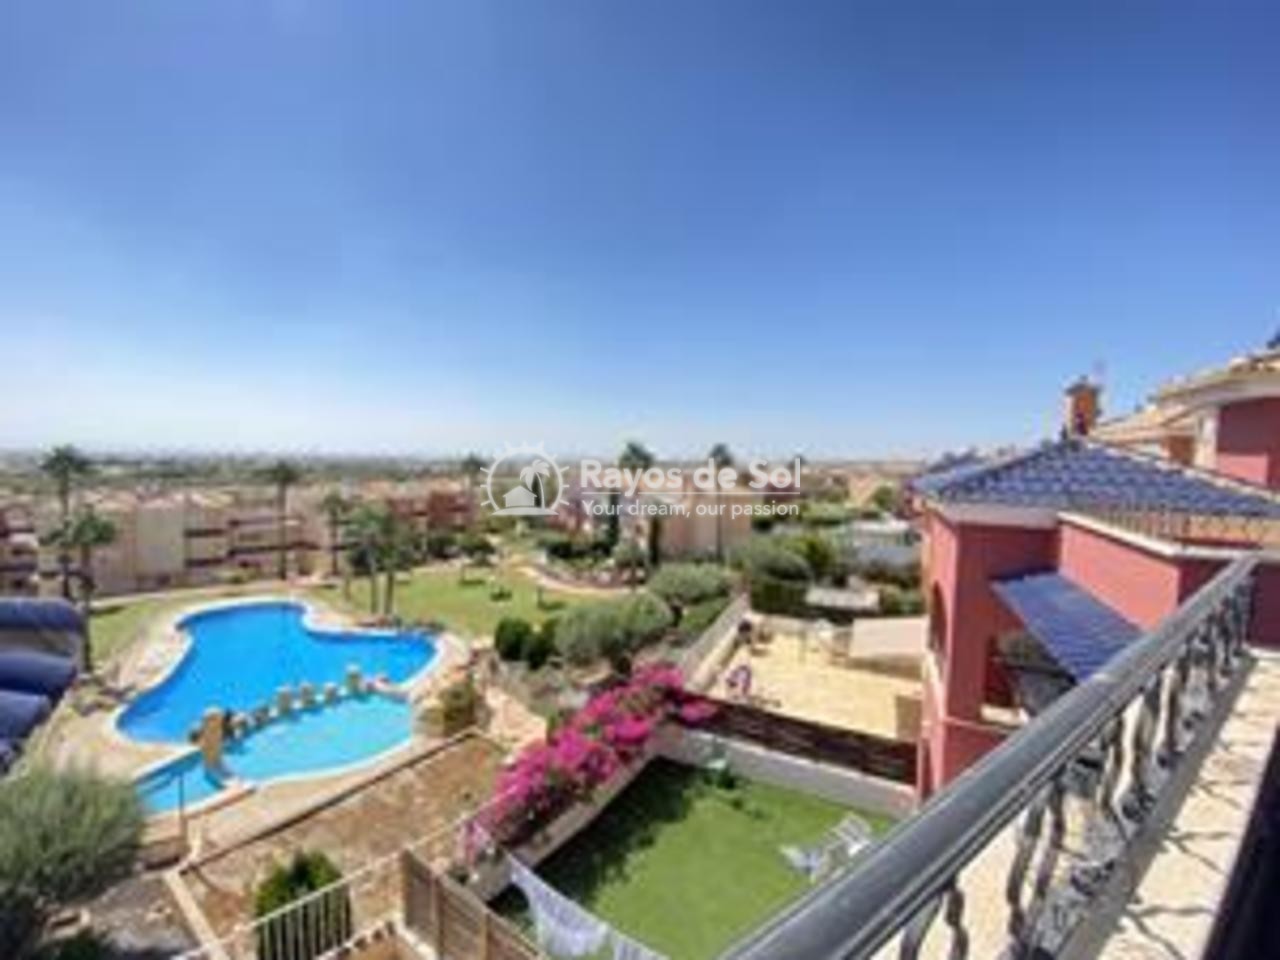 Apartment  in Altaona Golf and Country Village, Costa Cálida (svm670017) - 38